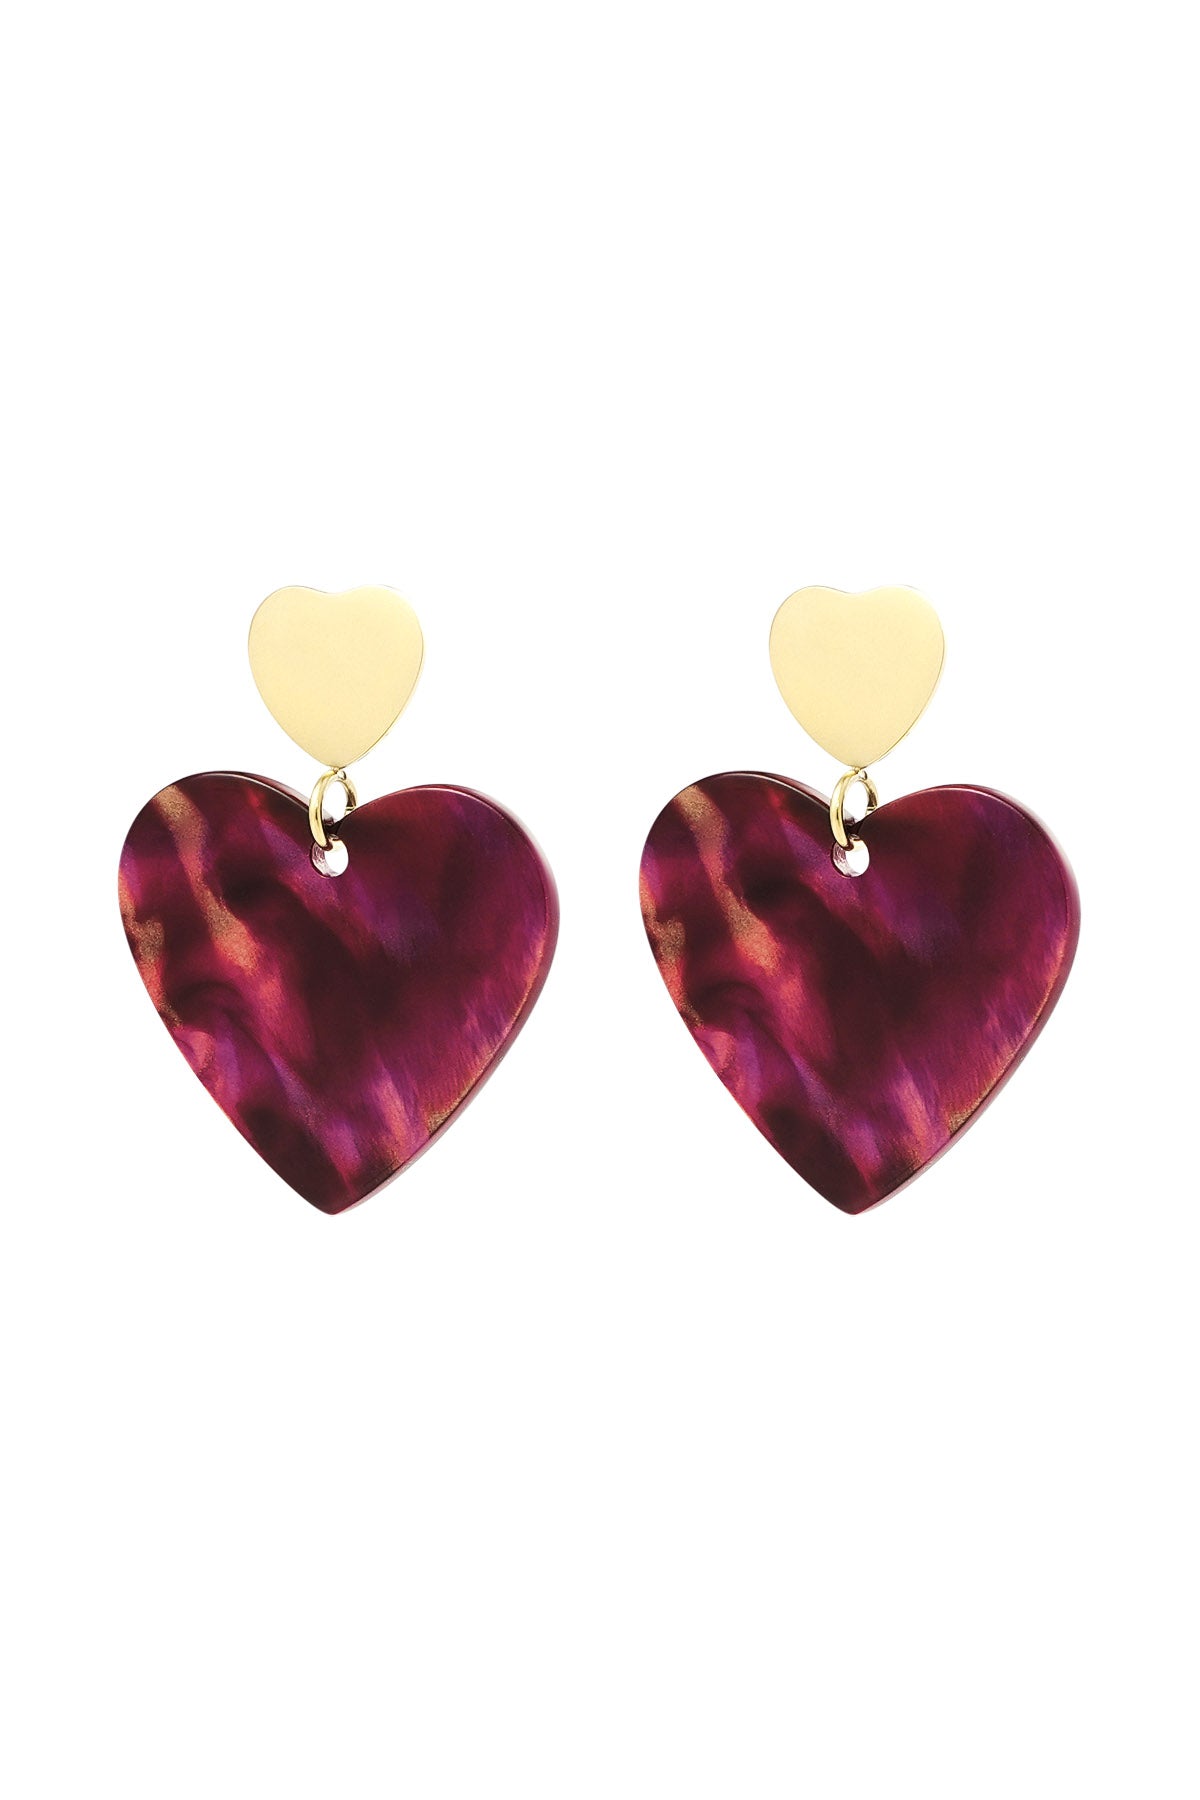 Thunder Egg - Double Heart Earrings in Gold and Red